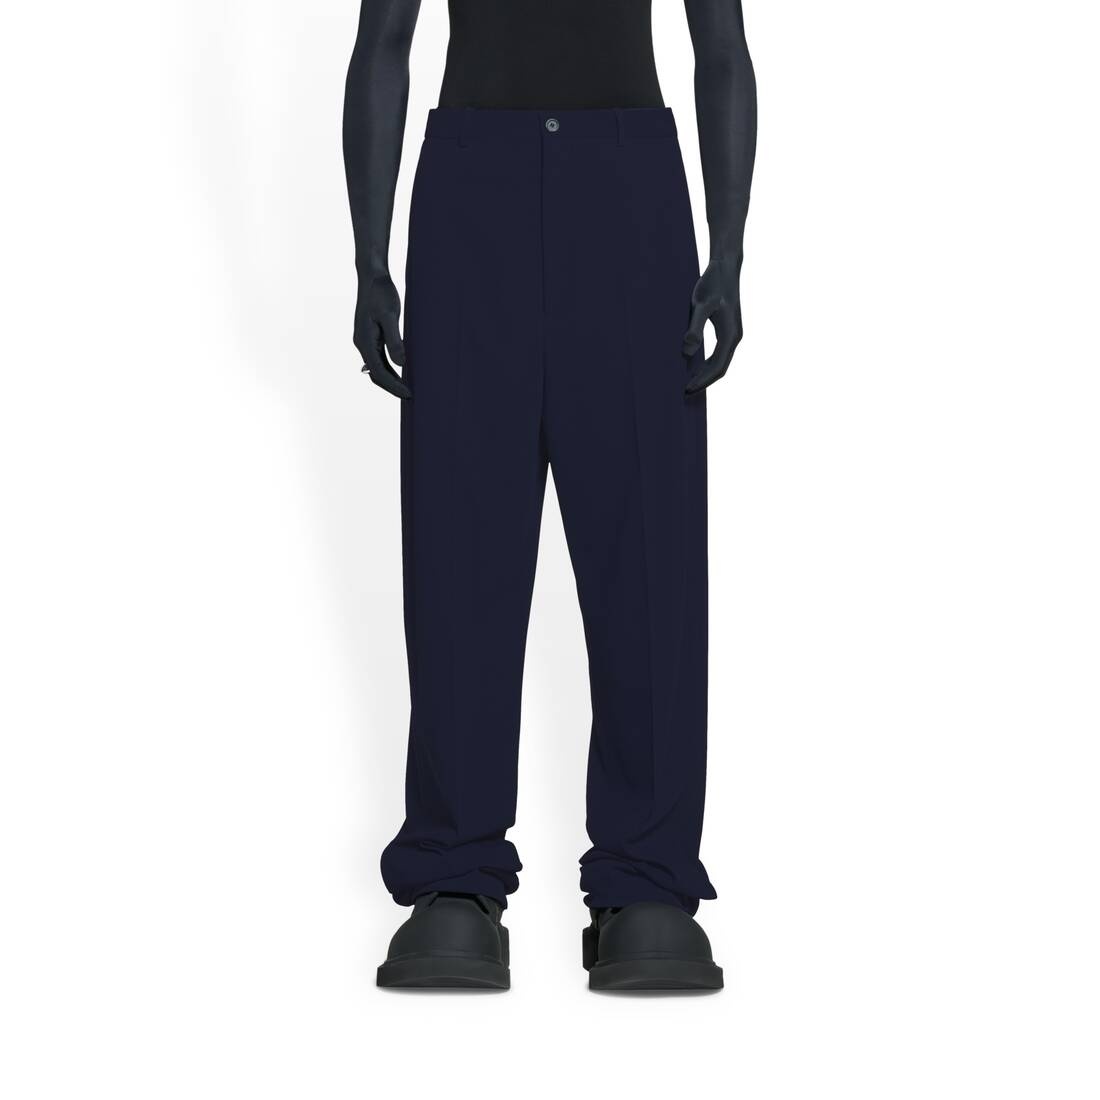 Men's Large Fit Tailored Pants in Navy Blue - 5